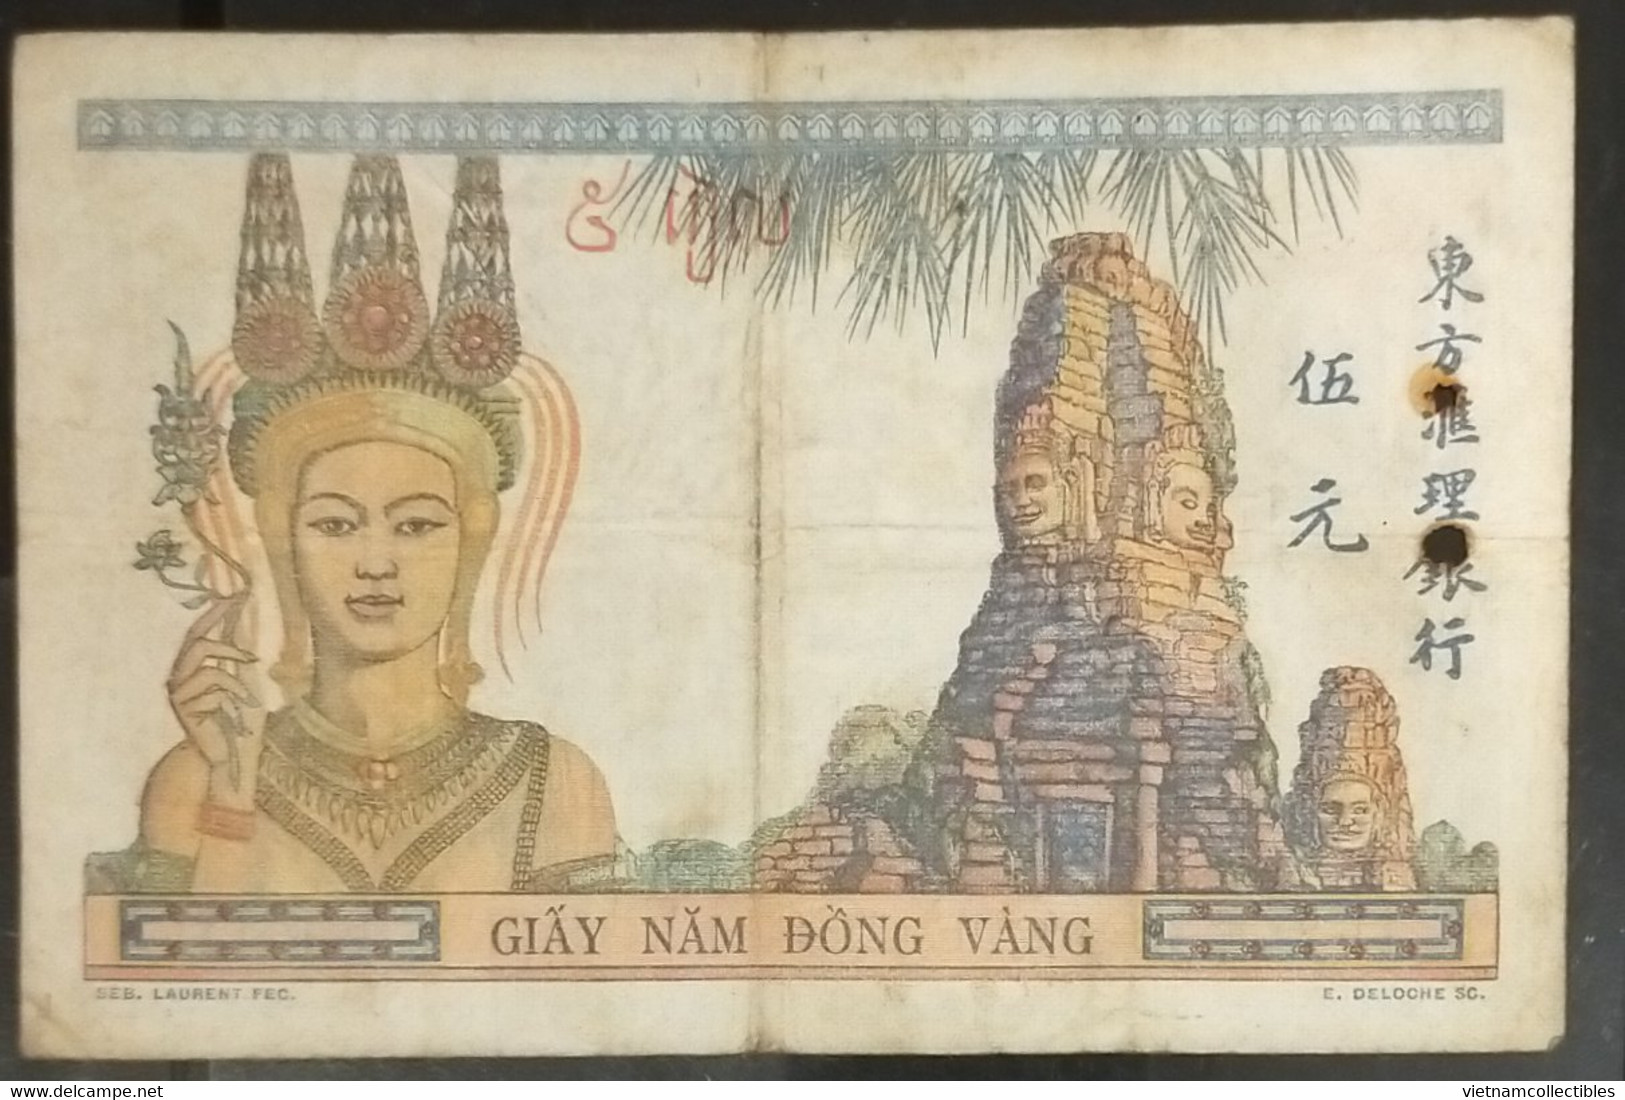 French Indochina Indo China Indochine Laos Vietnam Cambodia 5 Piastres VF Banknote Note 1932 - Pick # 53a / 2 Photos - Indochine